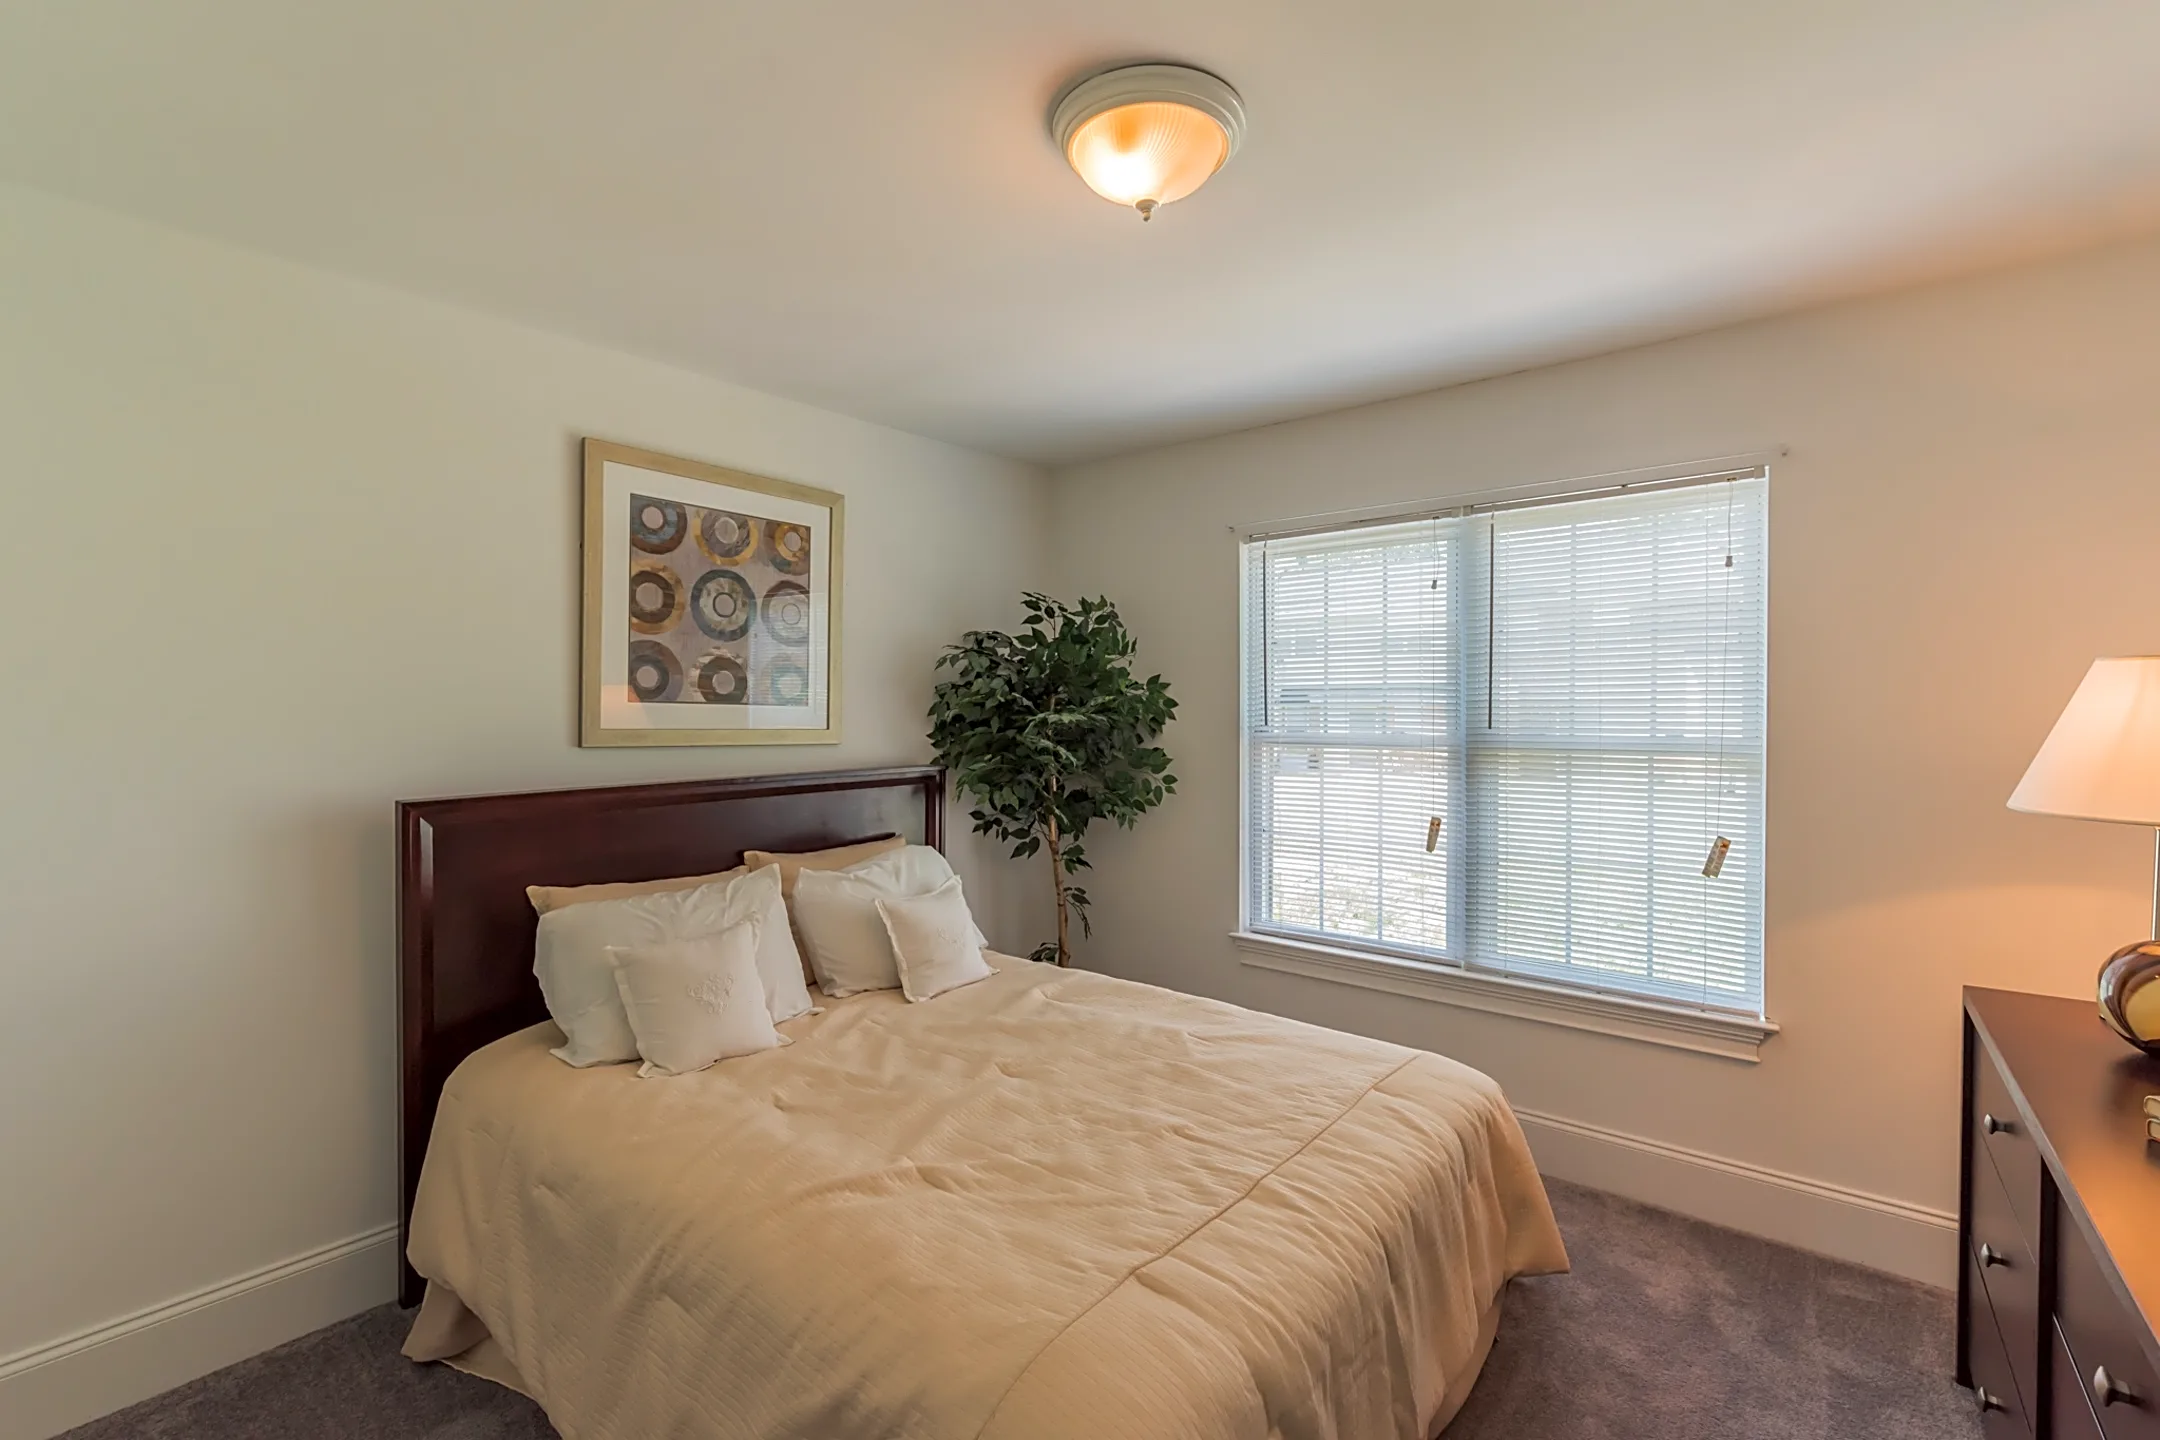 Bedroom - The Fairways Apartments & Townhomes - Thorndale, PA